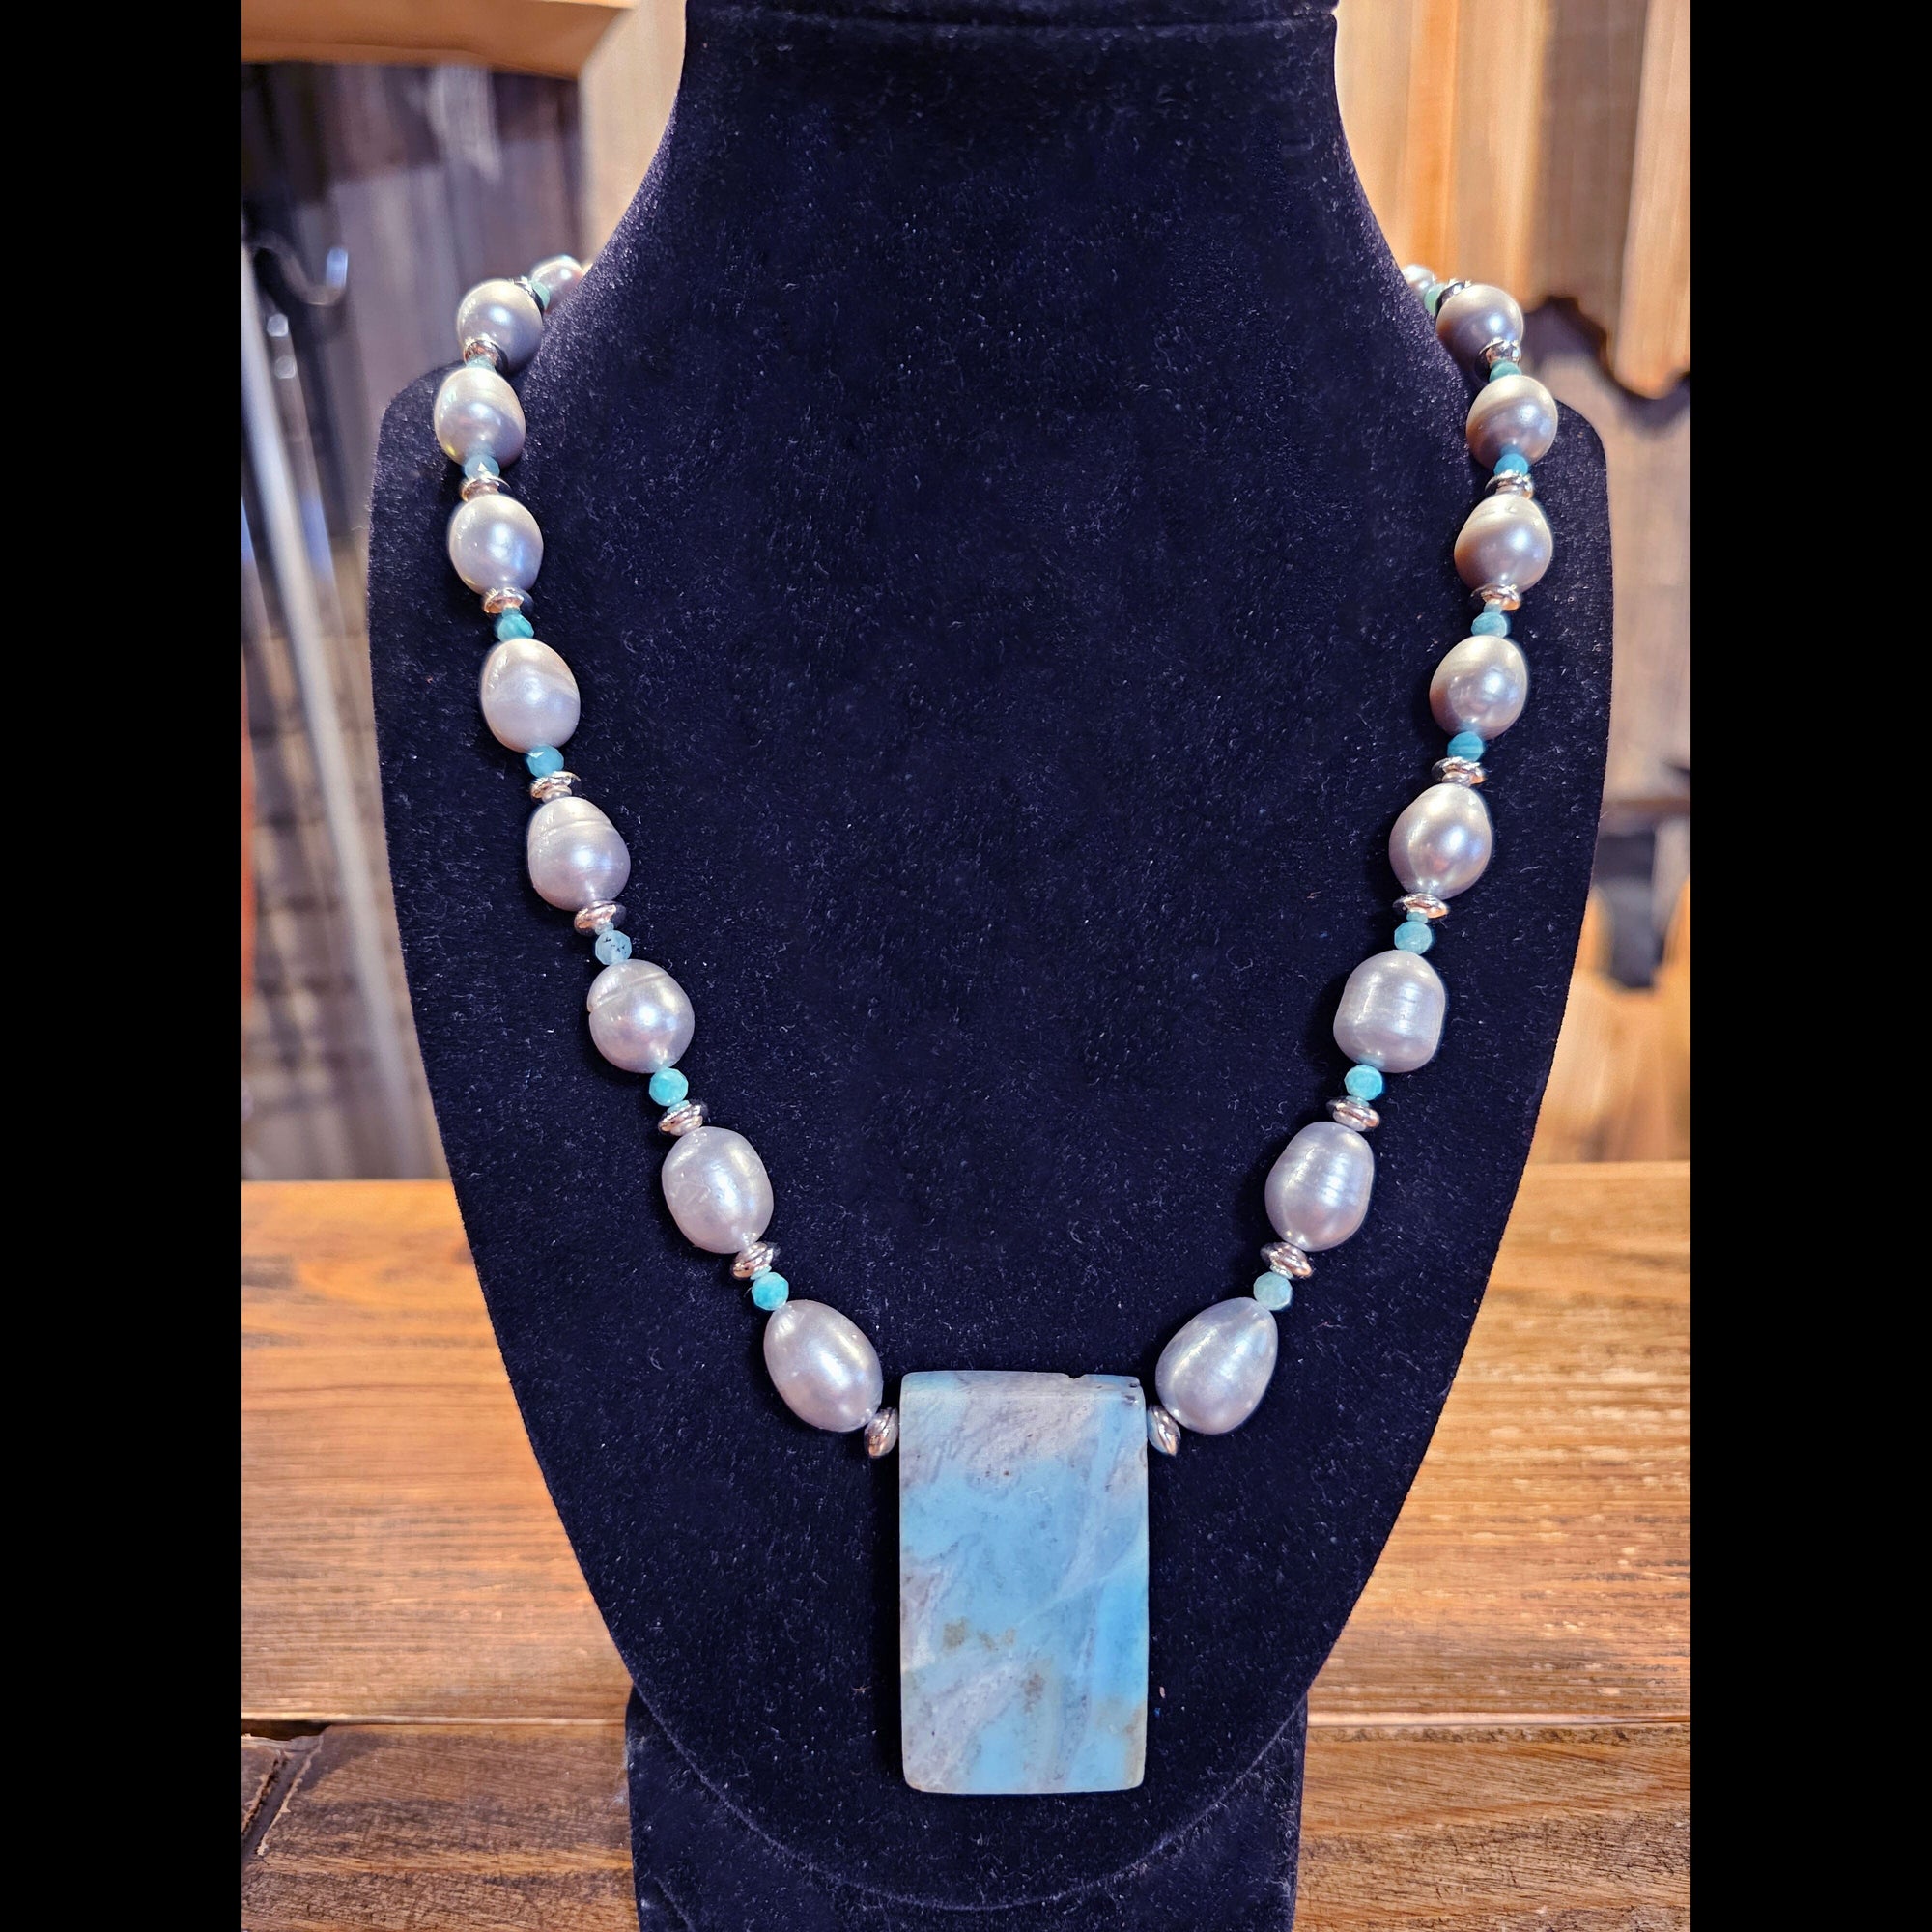 Amazonite on Pearl, Amazonite and Sterling Disc Necklace - NSZ70